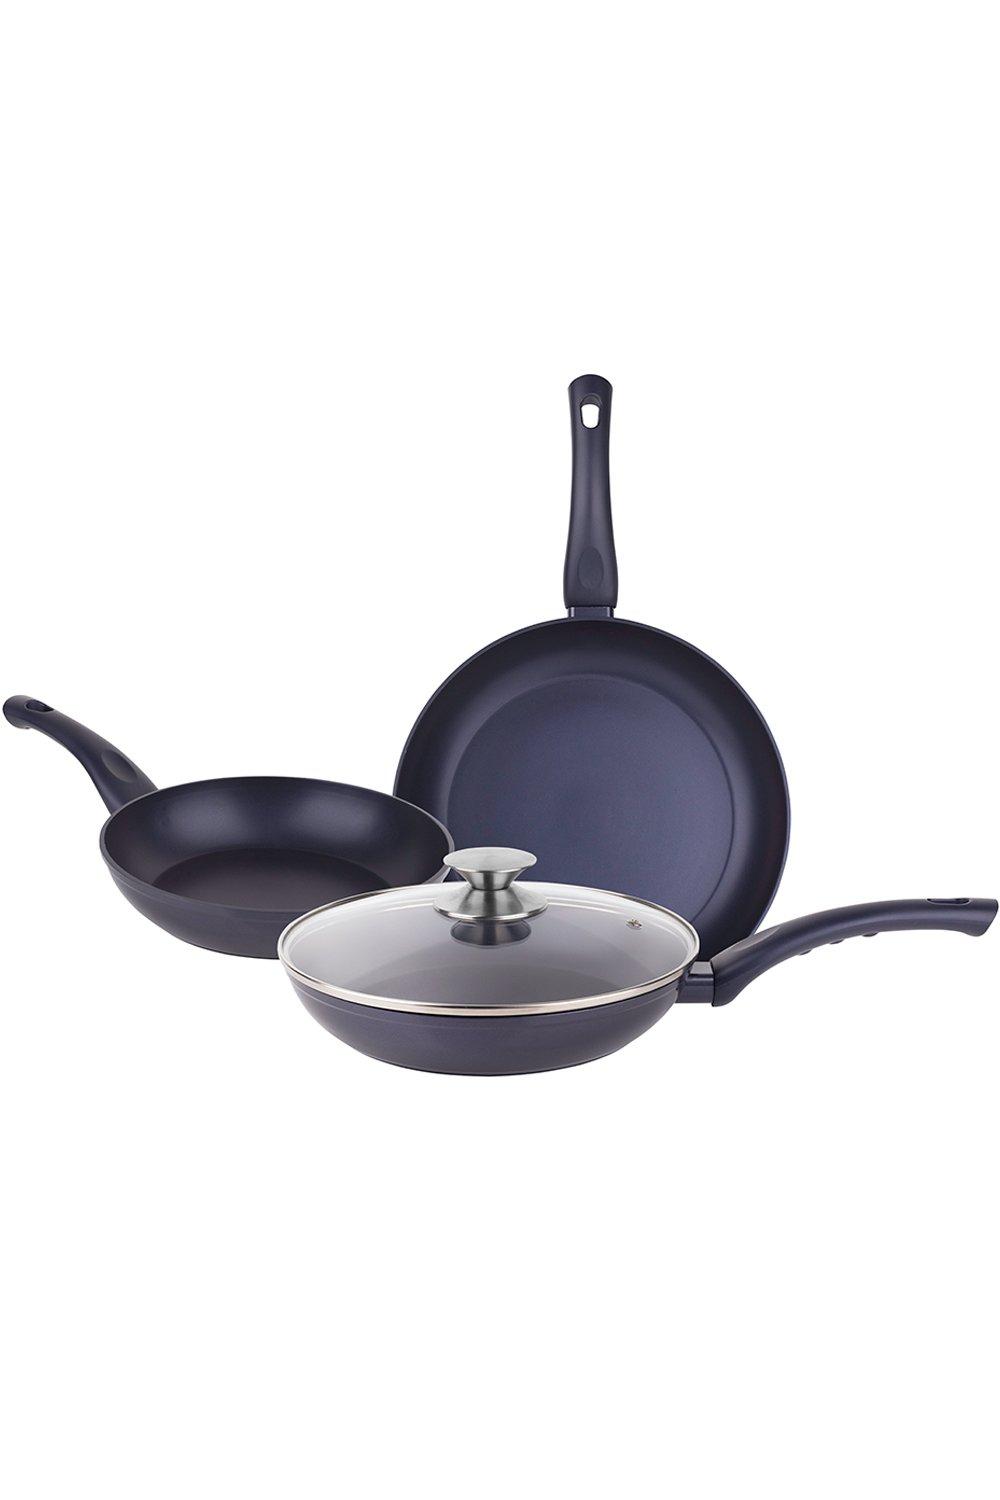 Ocean Non-stick Forged Aluminium Induction Frying Pan Set of 3 Black